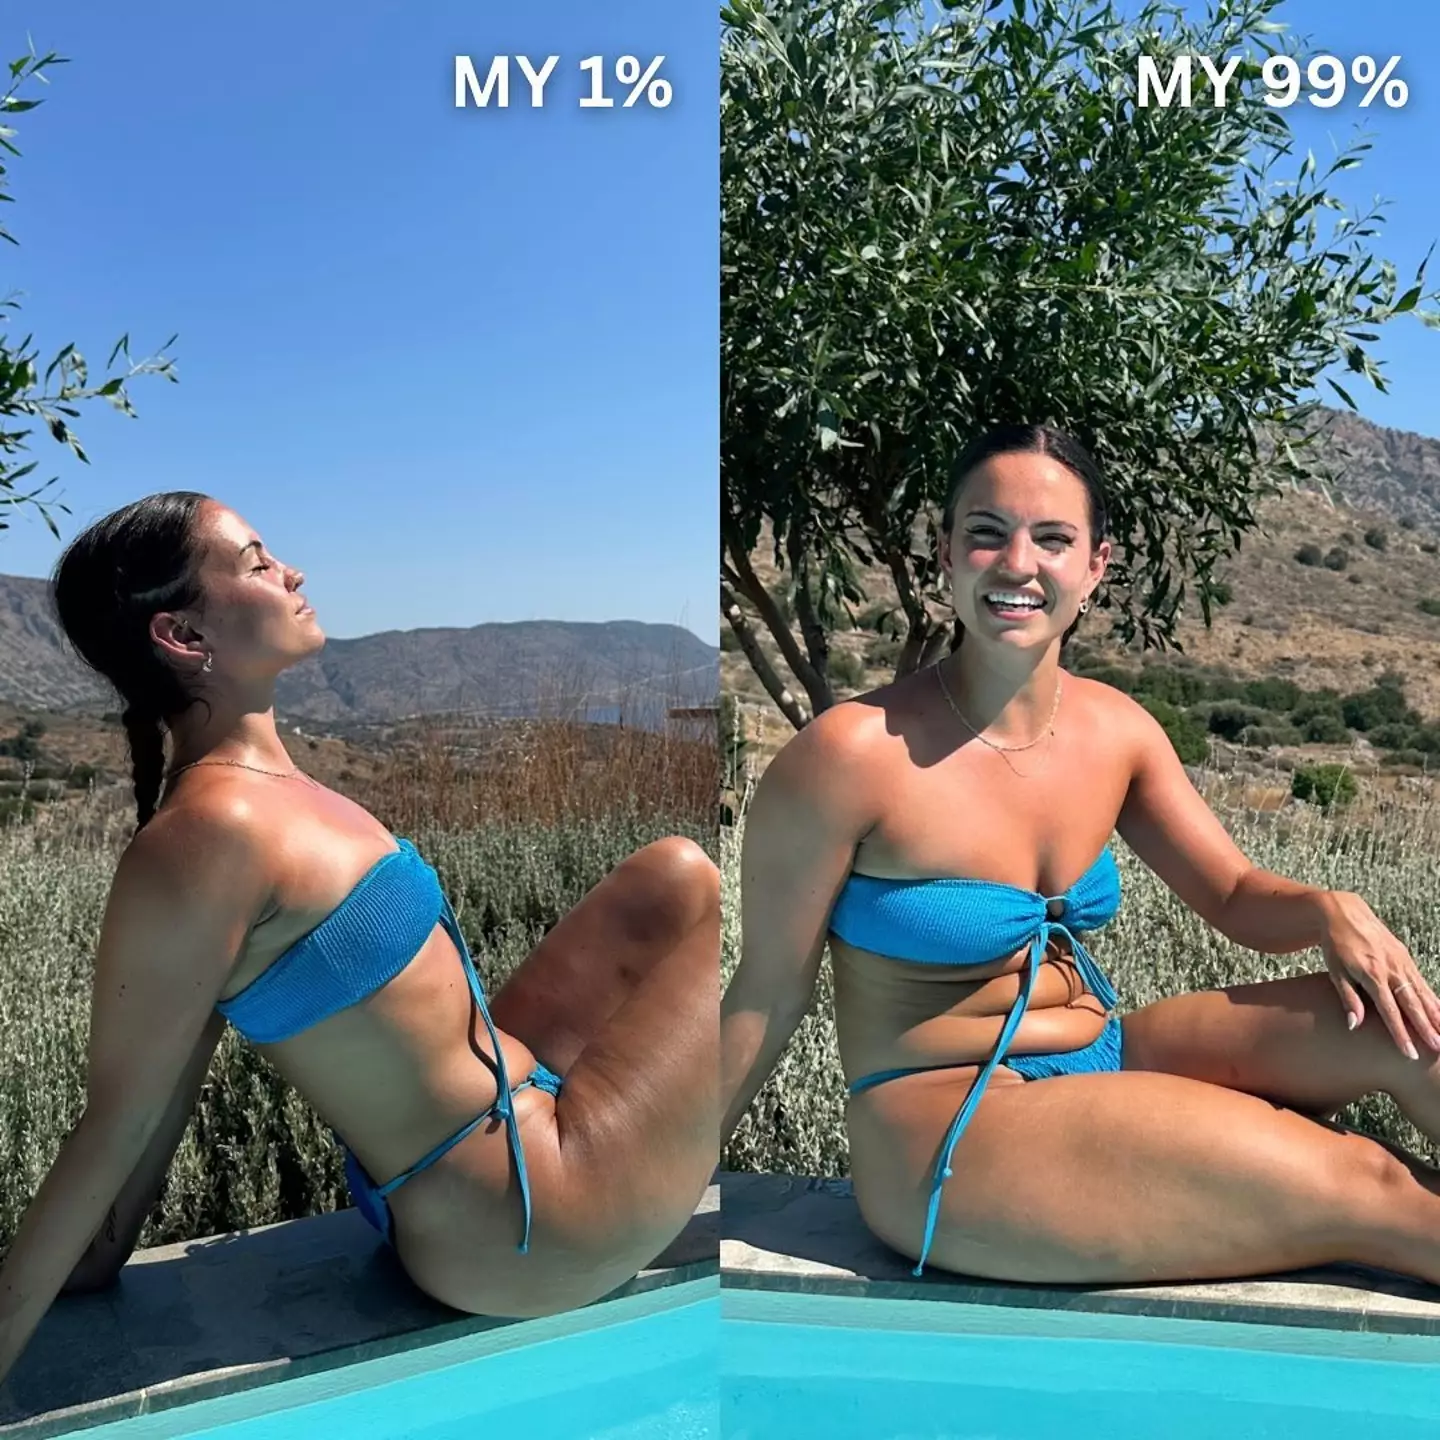 Online fitness coach Molly Ava uploaded comparison shots of her posed and resting body.